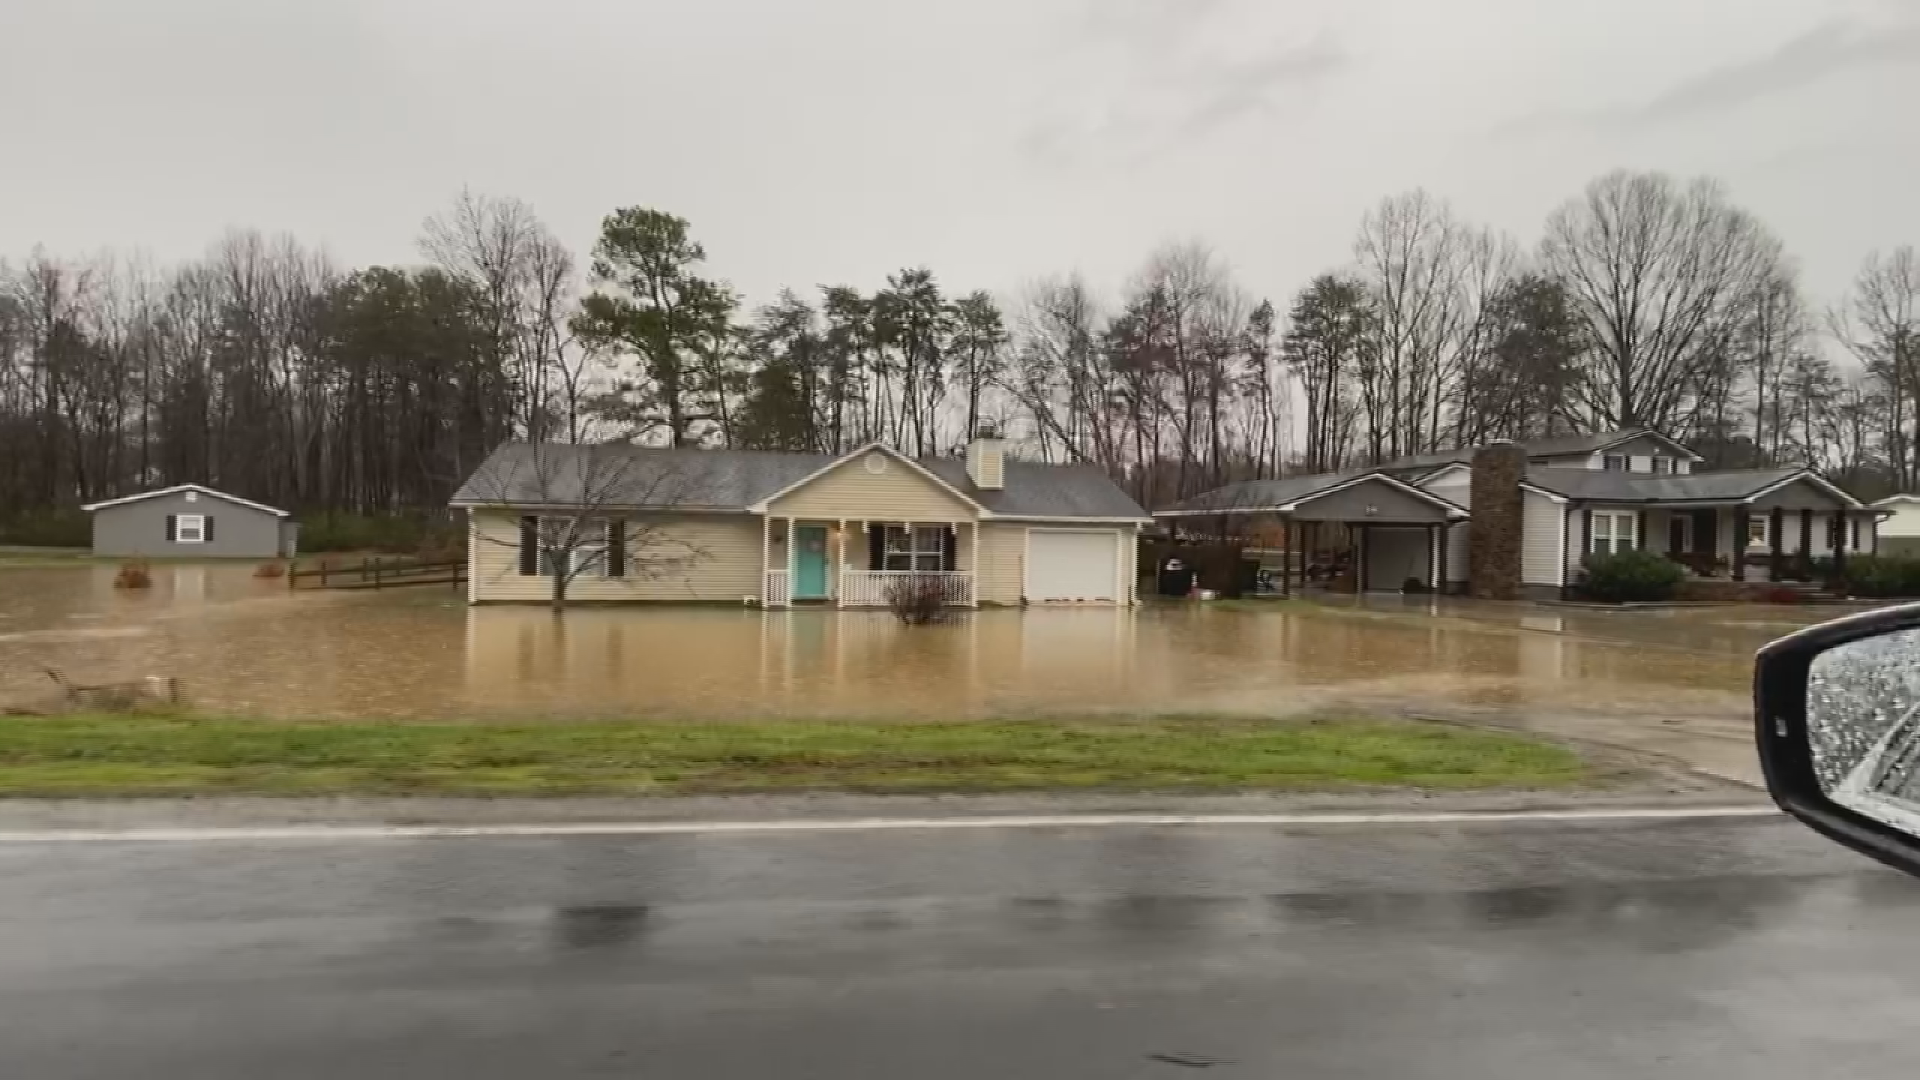 Water, water, everywhere! This home is in the North Davidson community of Davidson County.